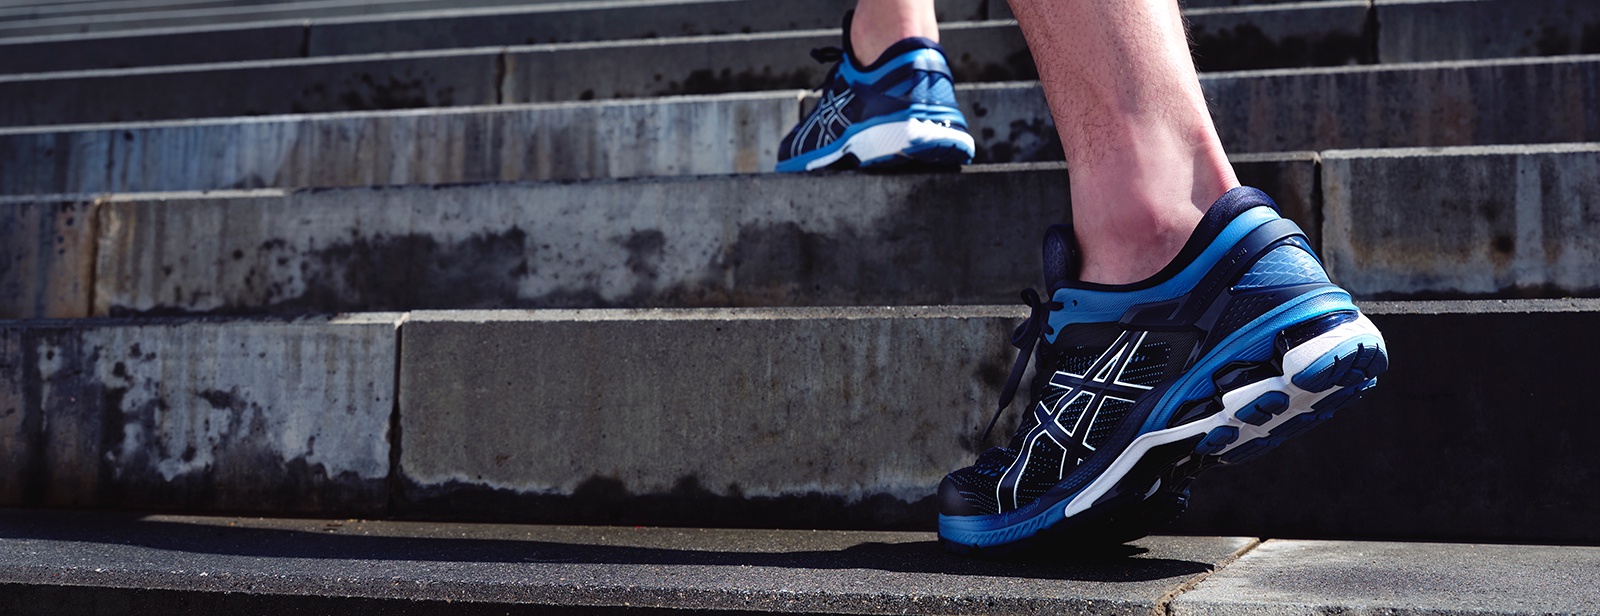 asics supportive running shoes